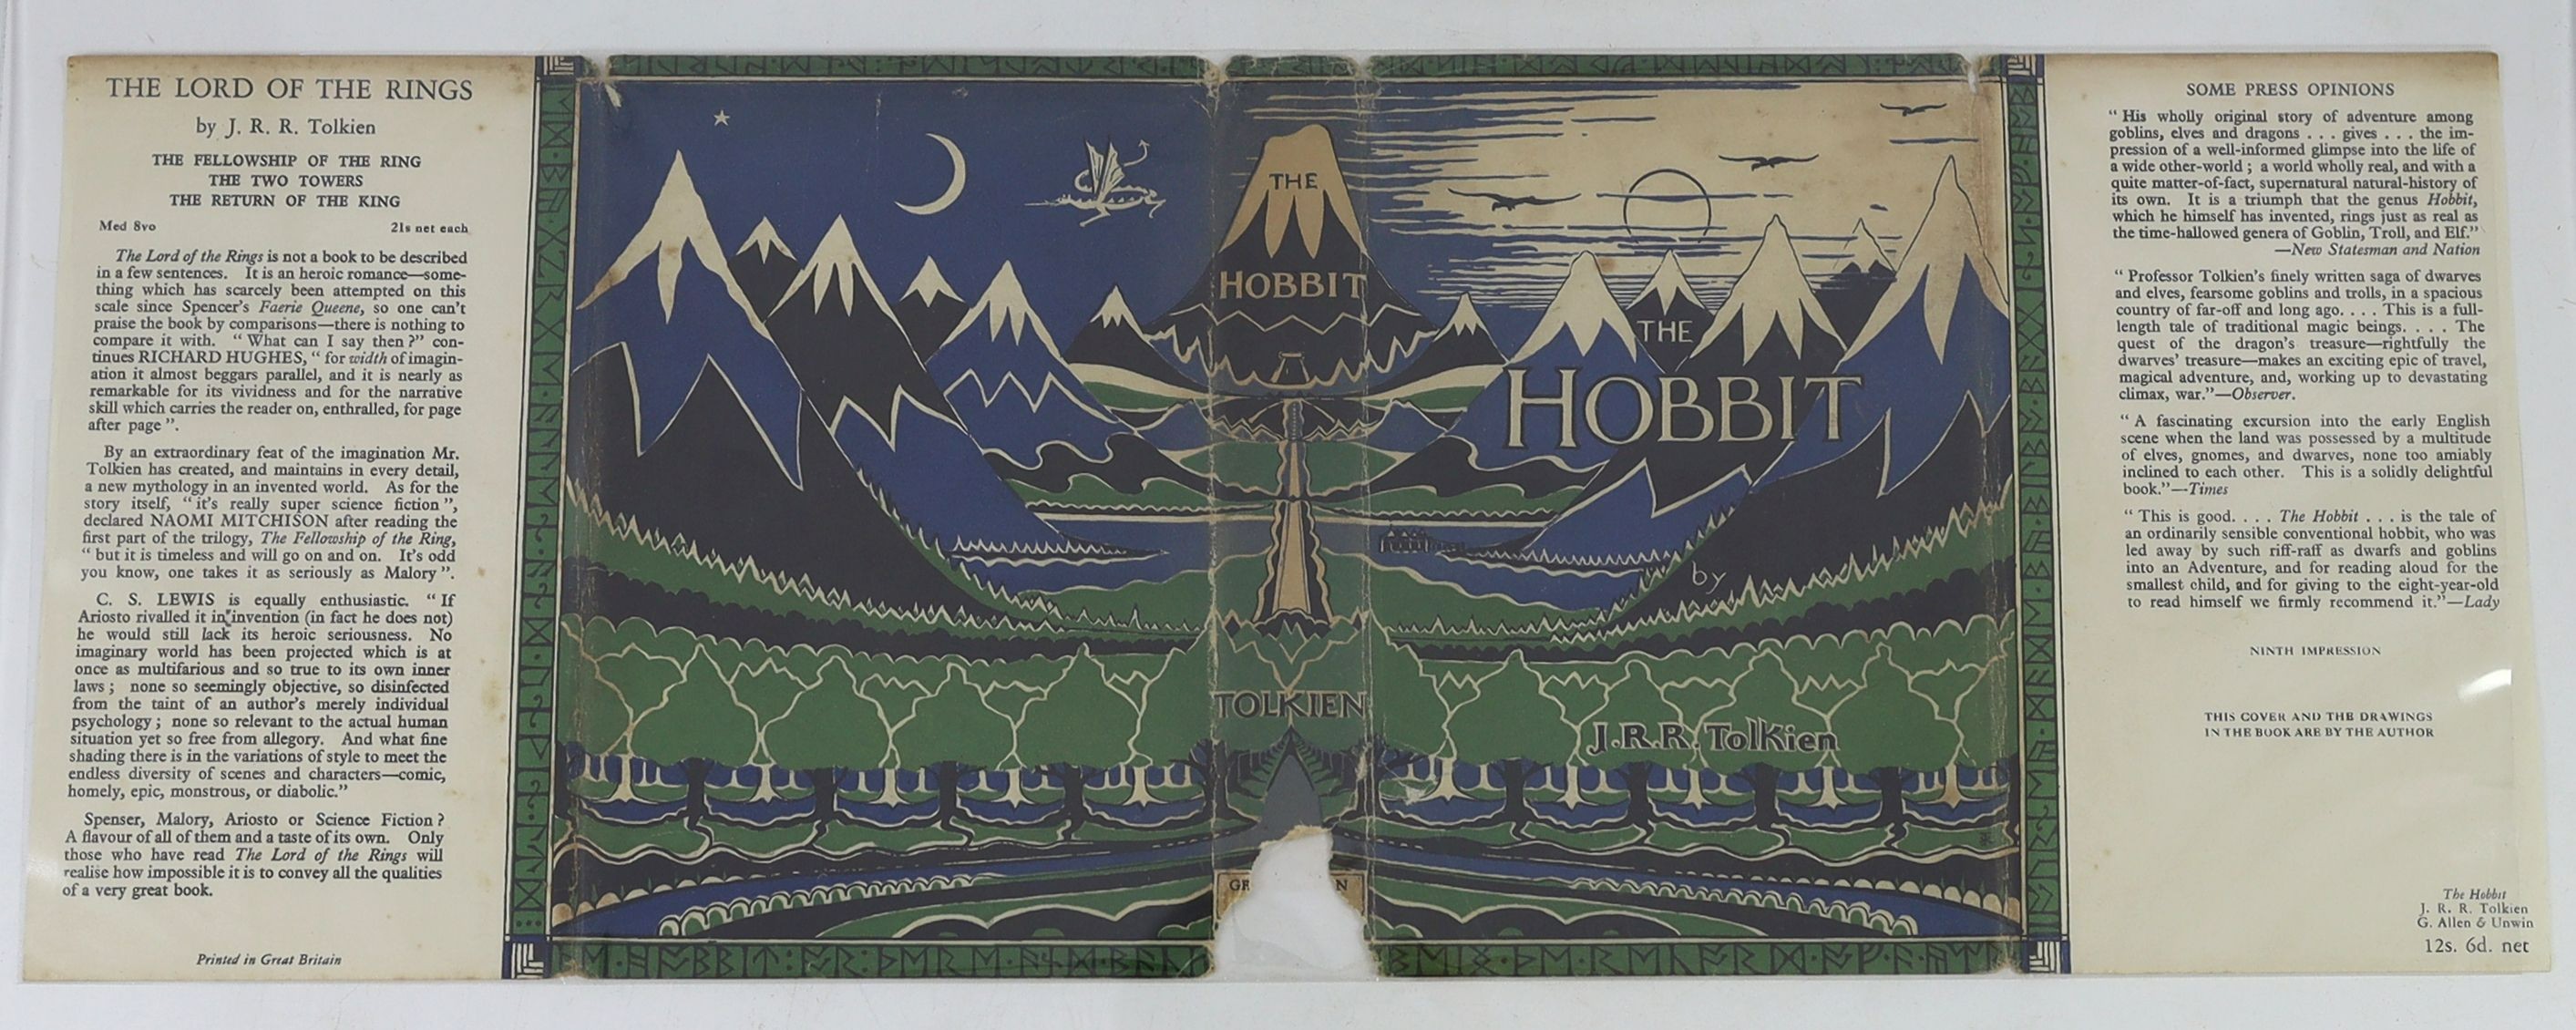 ° ° Tolkien, John Ronald Reuel - The Hobbit, 2nd edition, 9th impression, with colour - Image 2 of 5